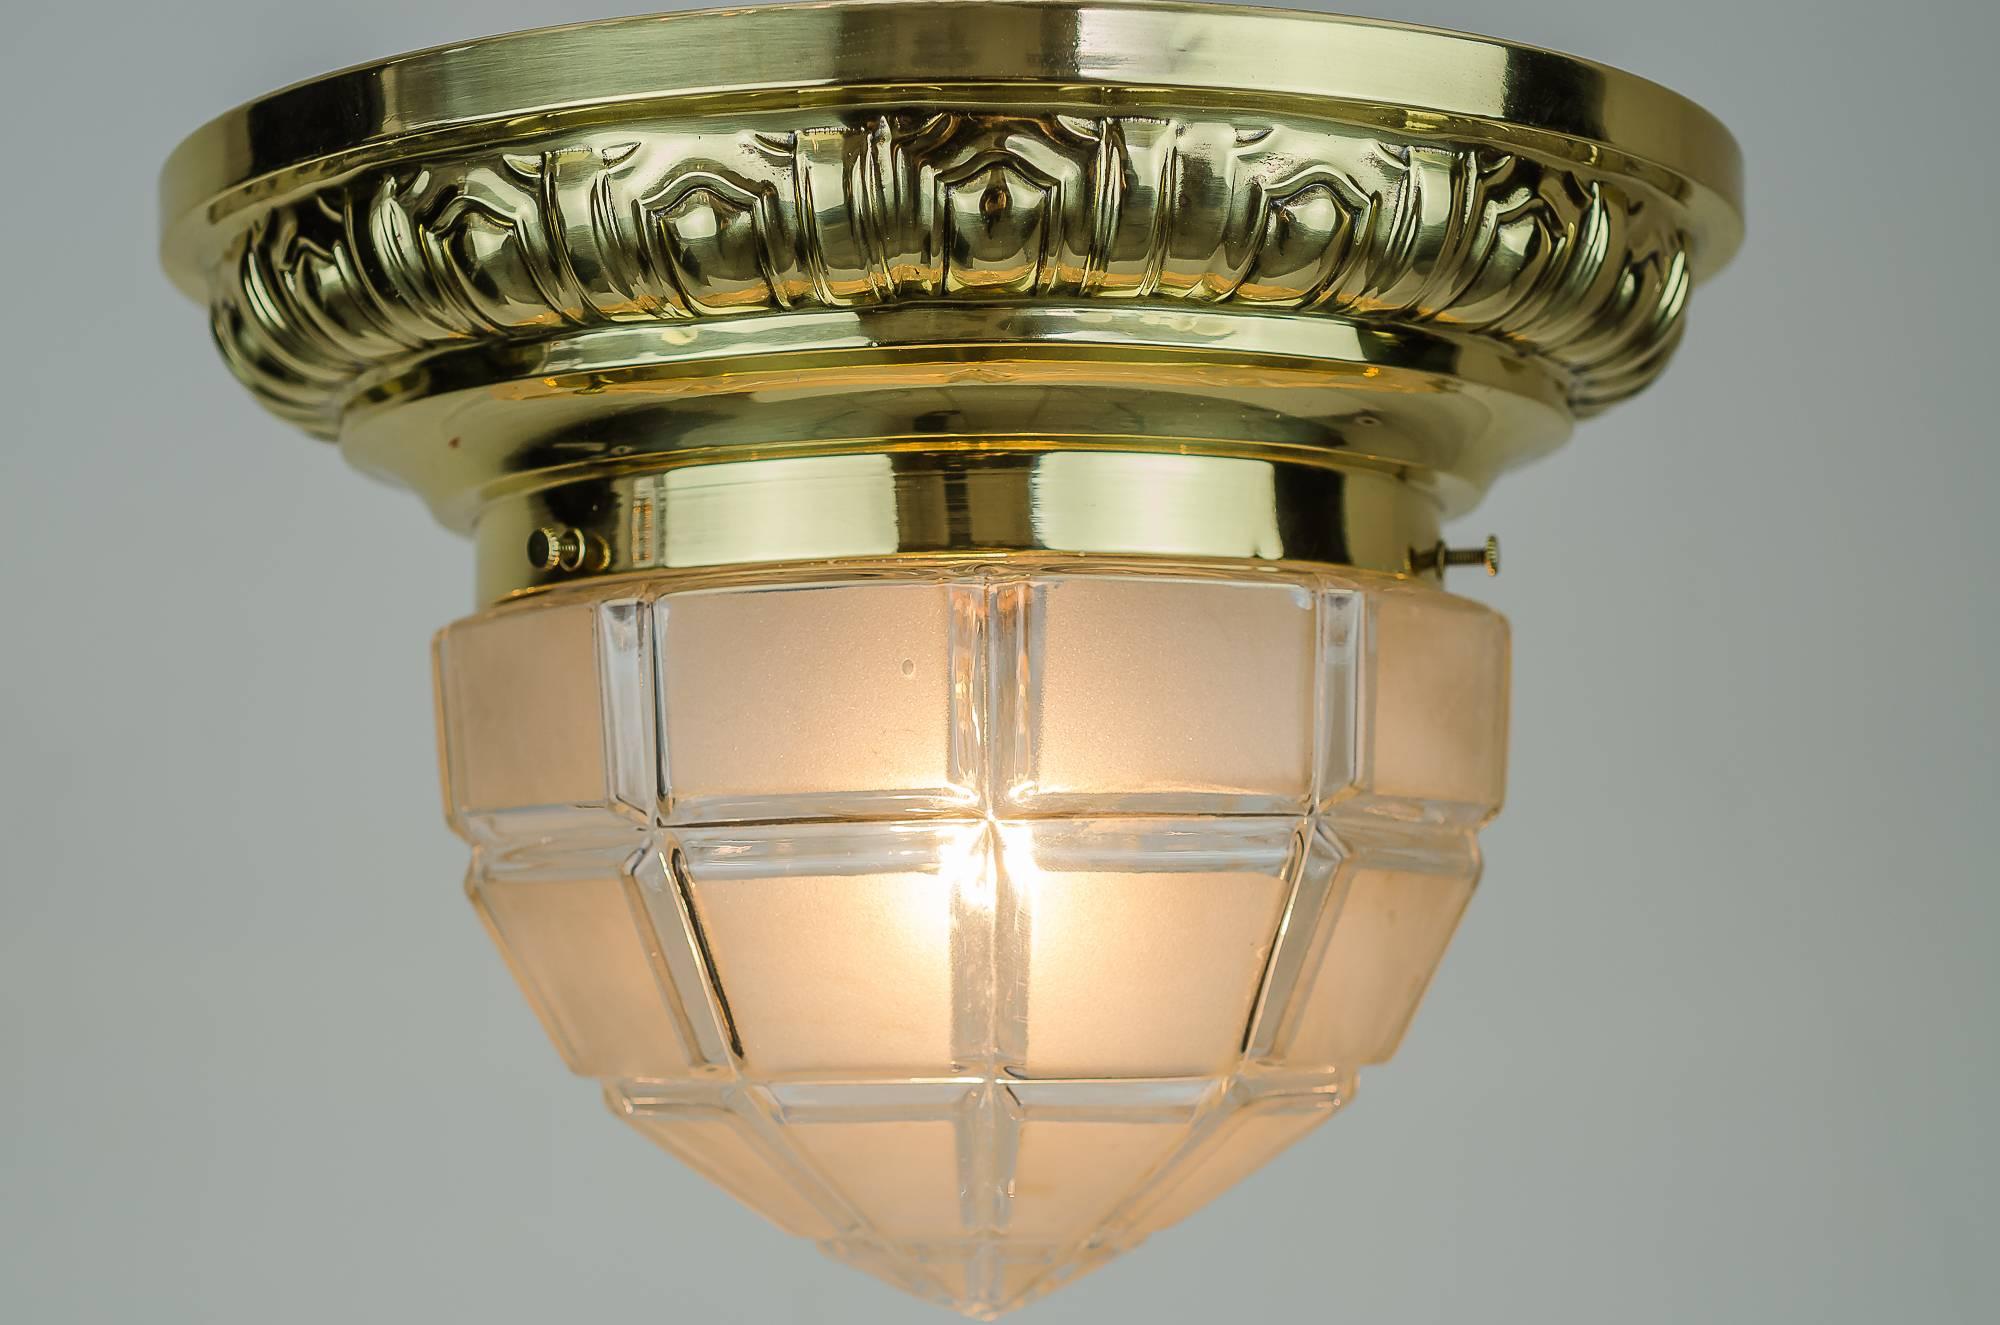 2 Art Nouveau Ceiling Lamps, circa 1908 
polished and stove enameled.